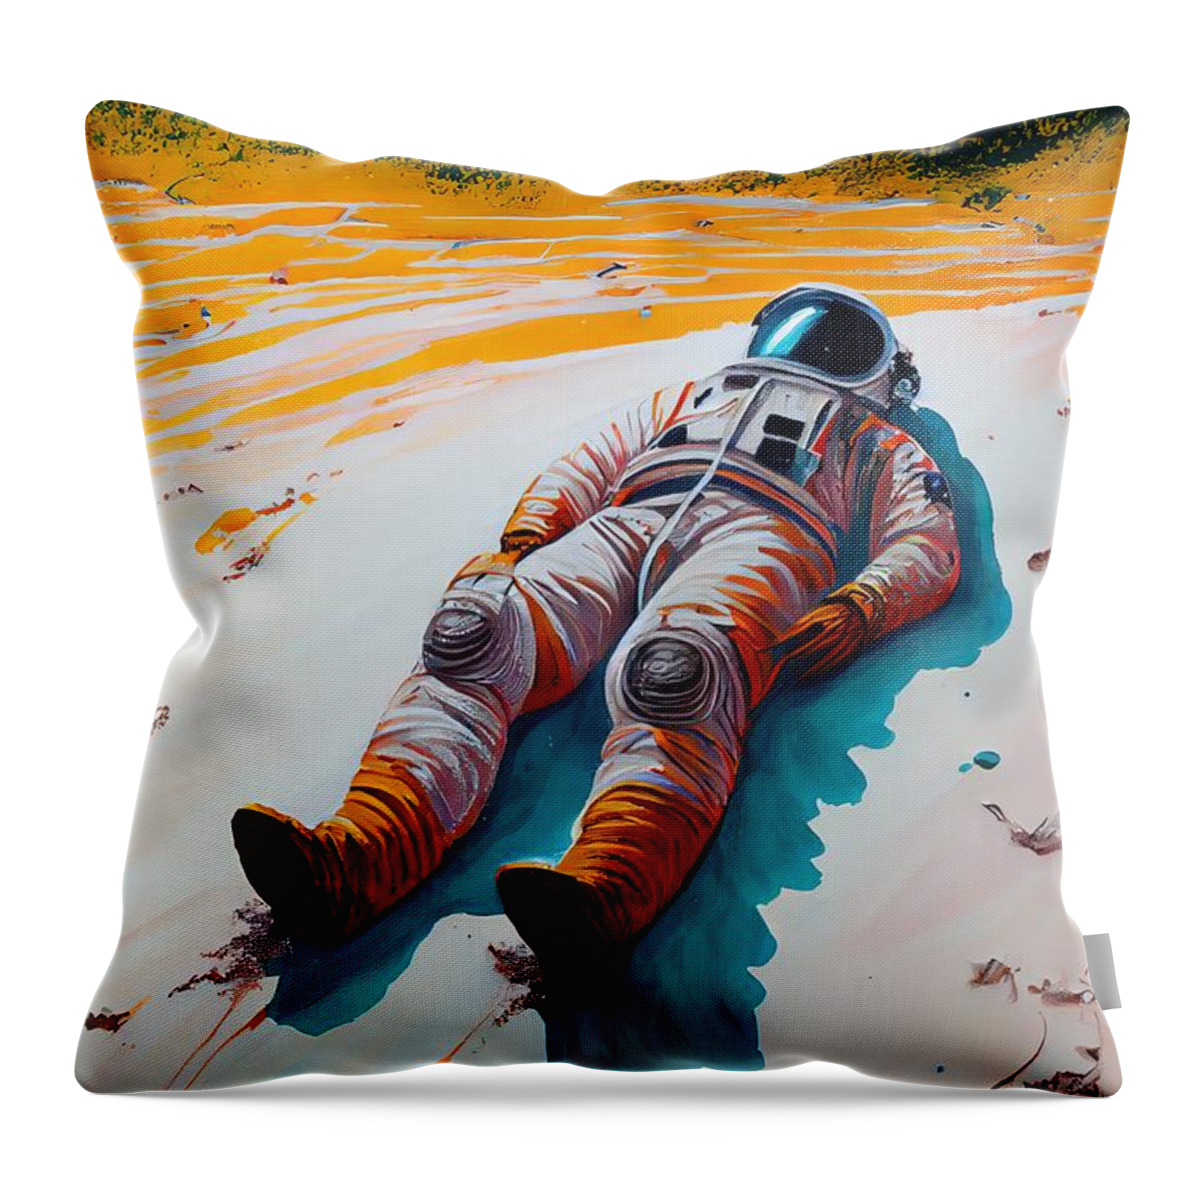 Astronaut Throw Pillow featuring the painting Tired by N Akkash